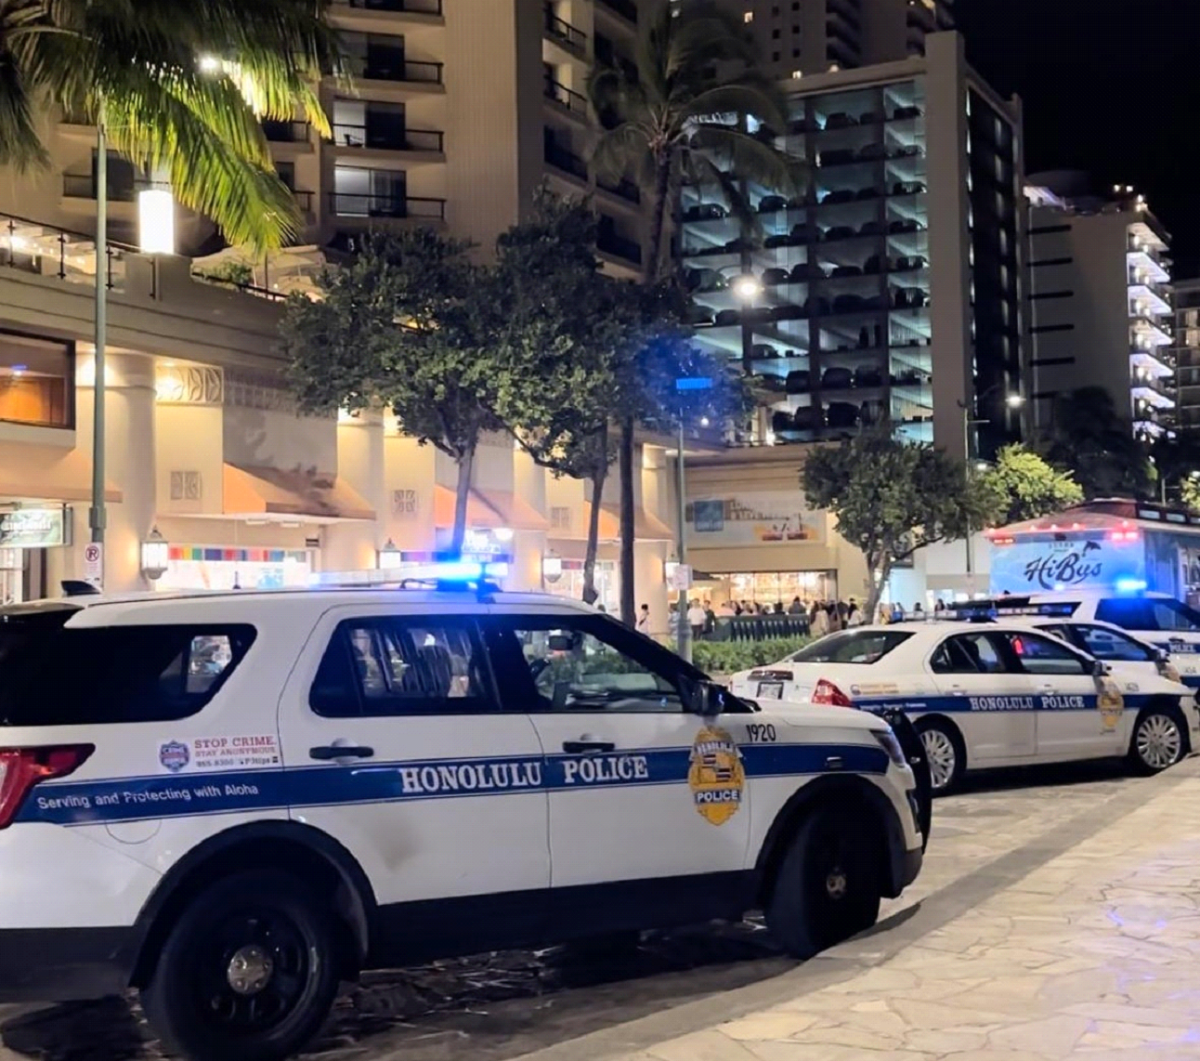 Rules intended to keep repeat offenders out of Waikiki do not seem to be a deterrent.